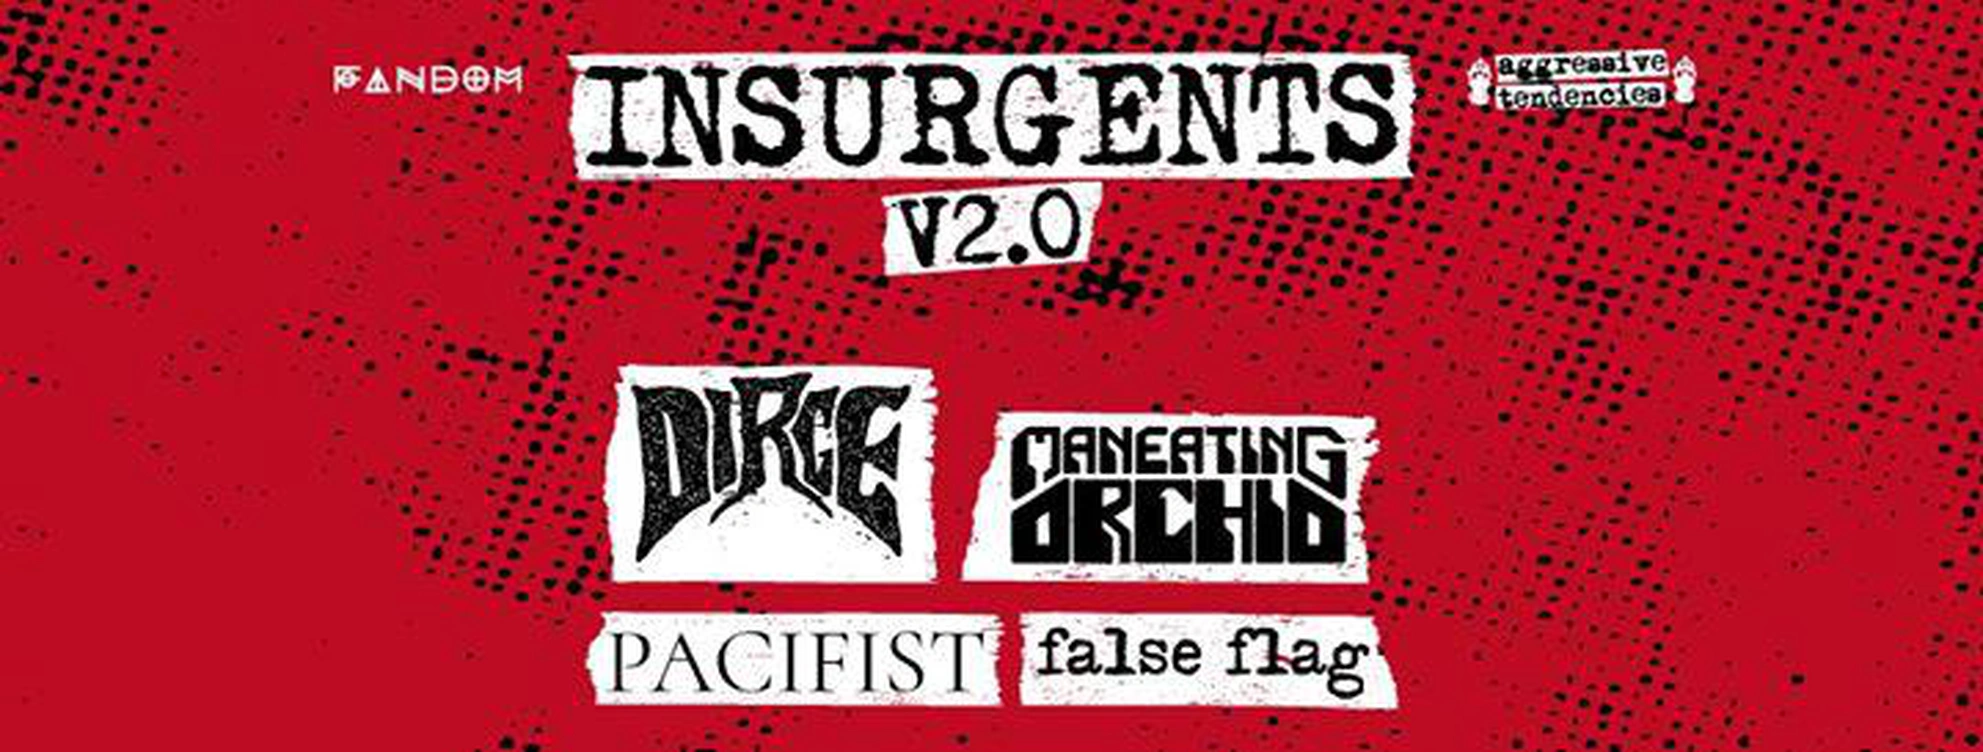 Insurgents V2.0: Dirge, Maneating Orchid, Pacifist, False Flag